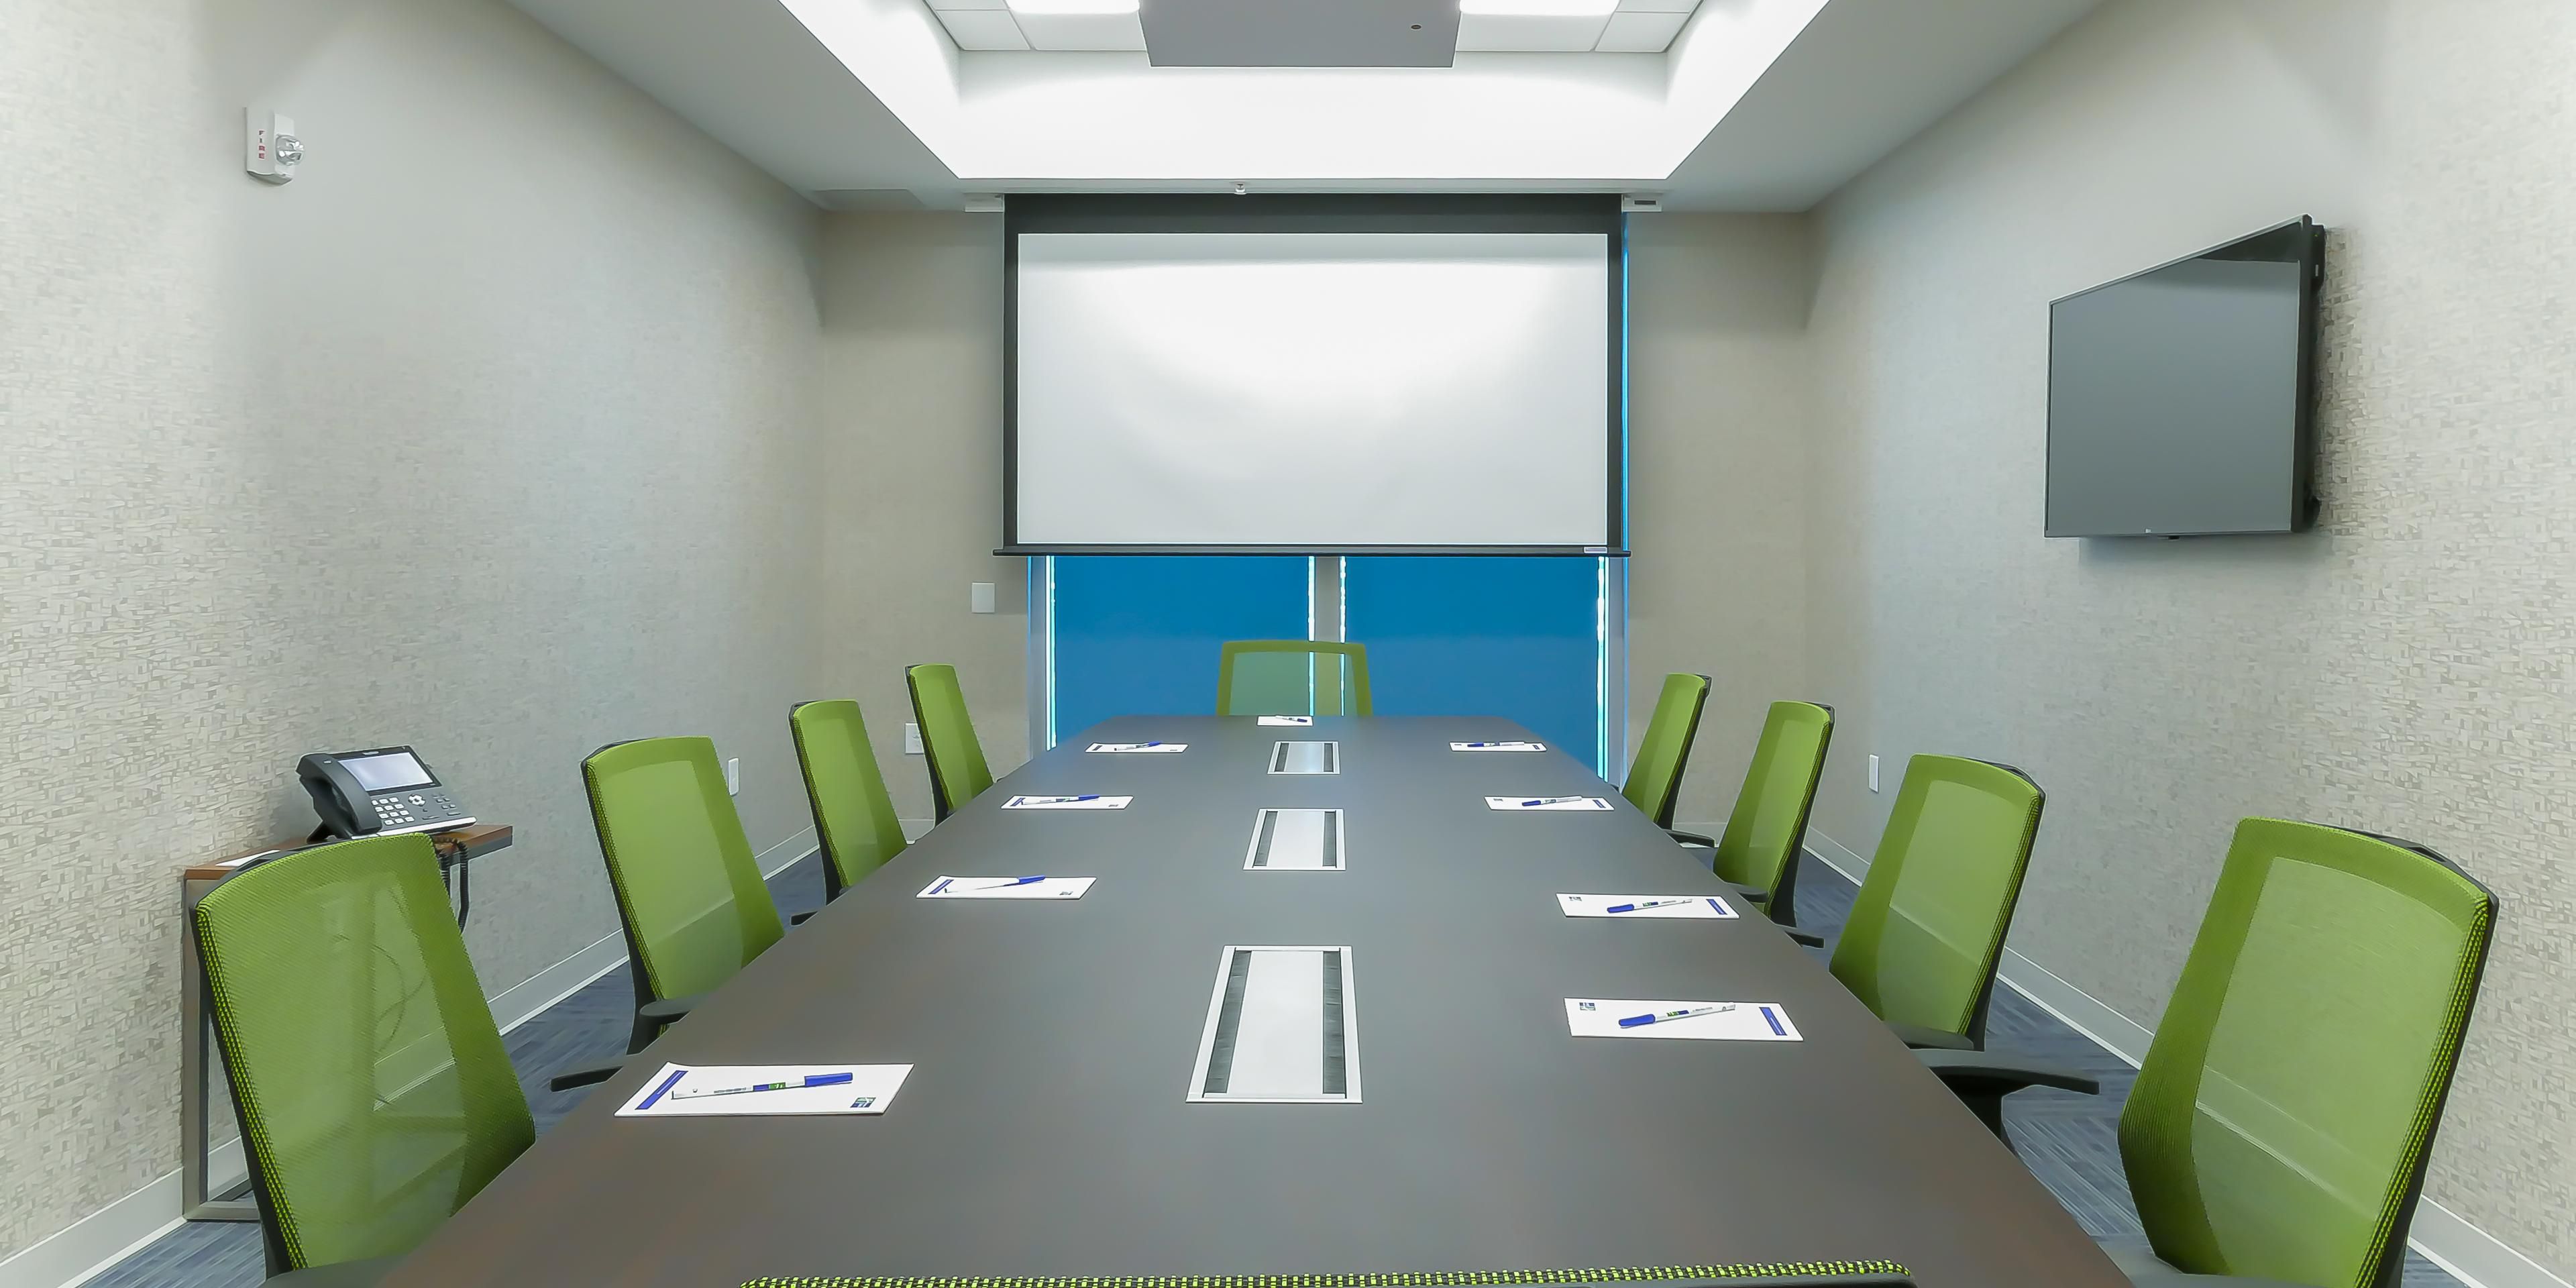 Planning to meet with the team? Our hotel offers 1620 sq ft of flexible meeting space. We take pride in providing everything you need to make your meeting a huge success! Our team looks forward to serving  you.